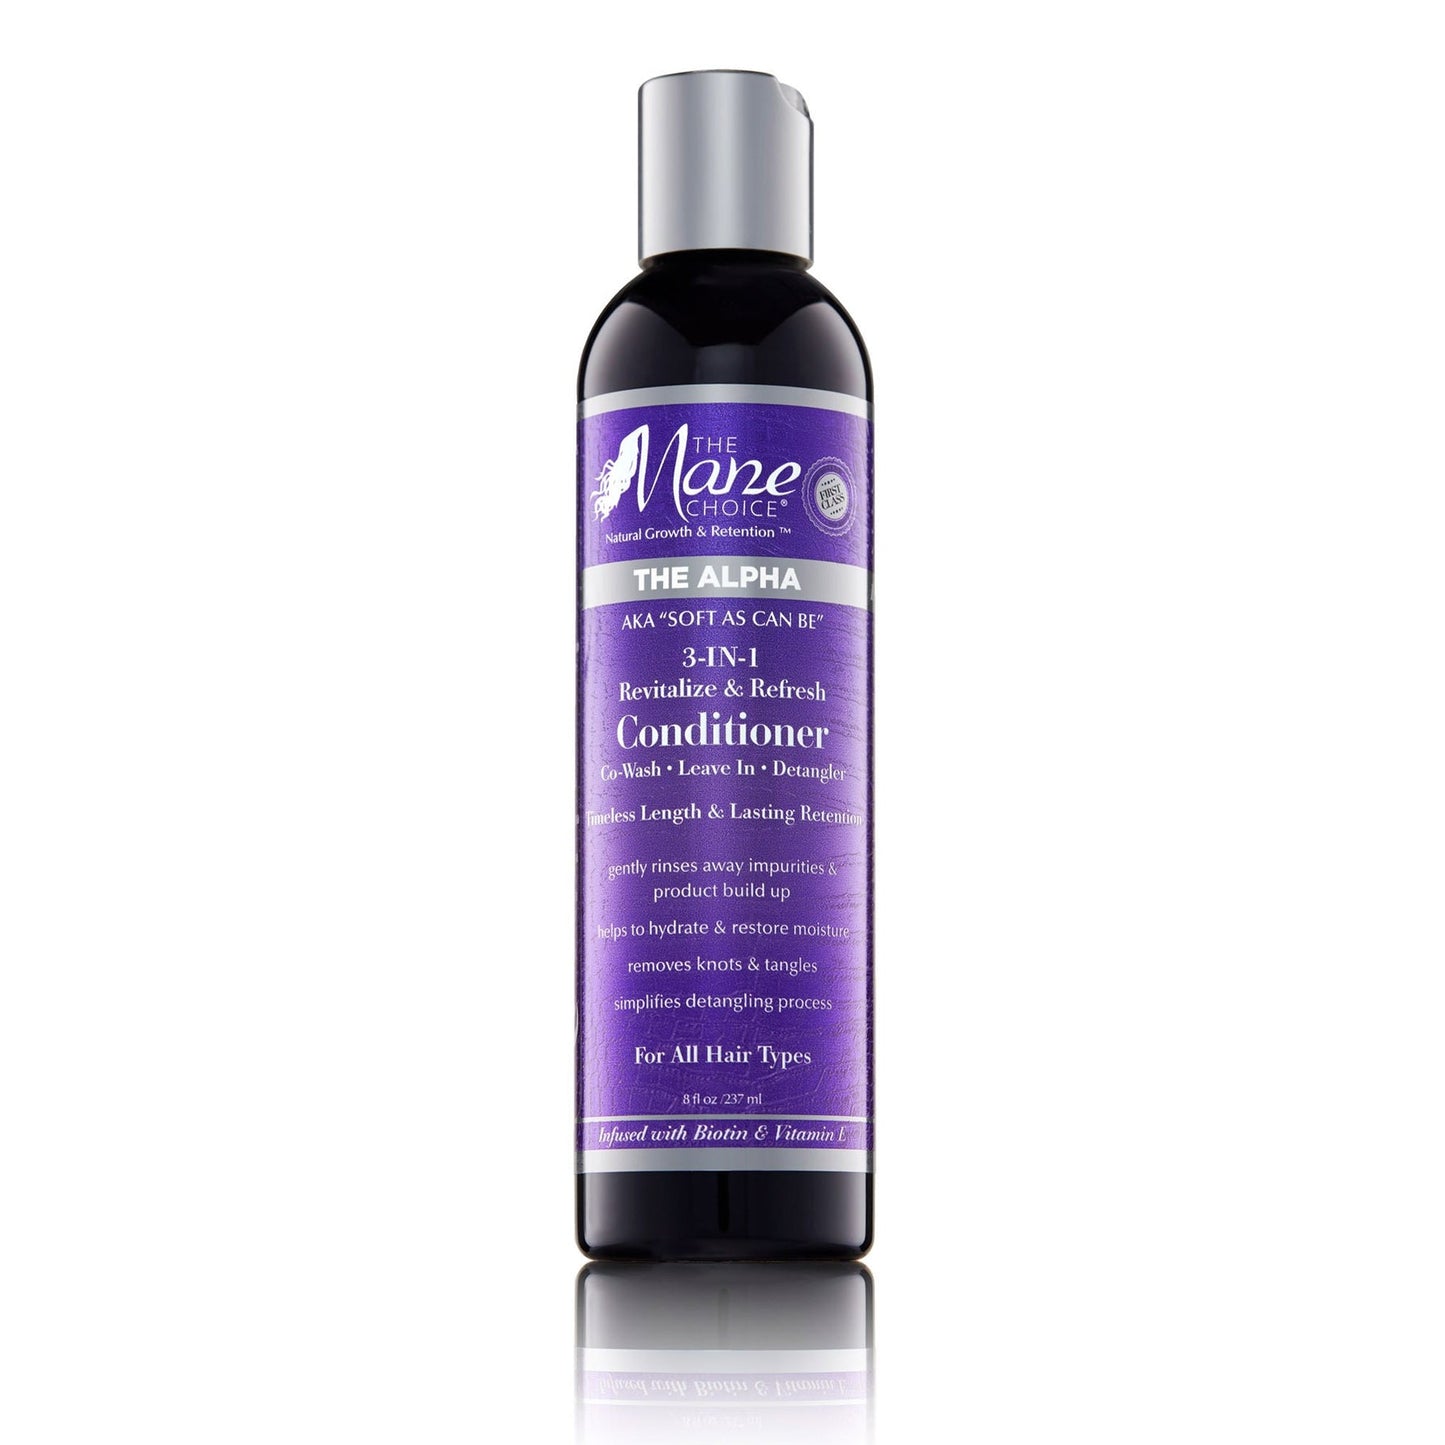 The Mane Choice 3in1 Conditioner